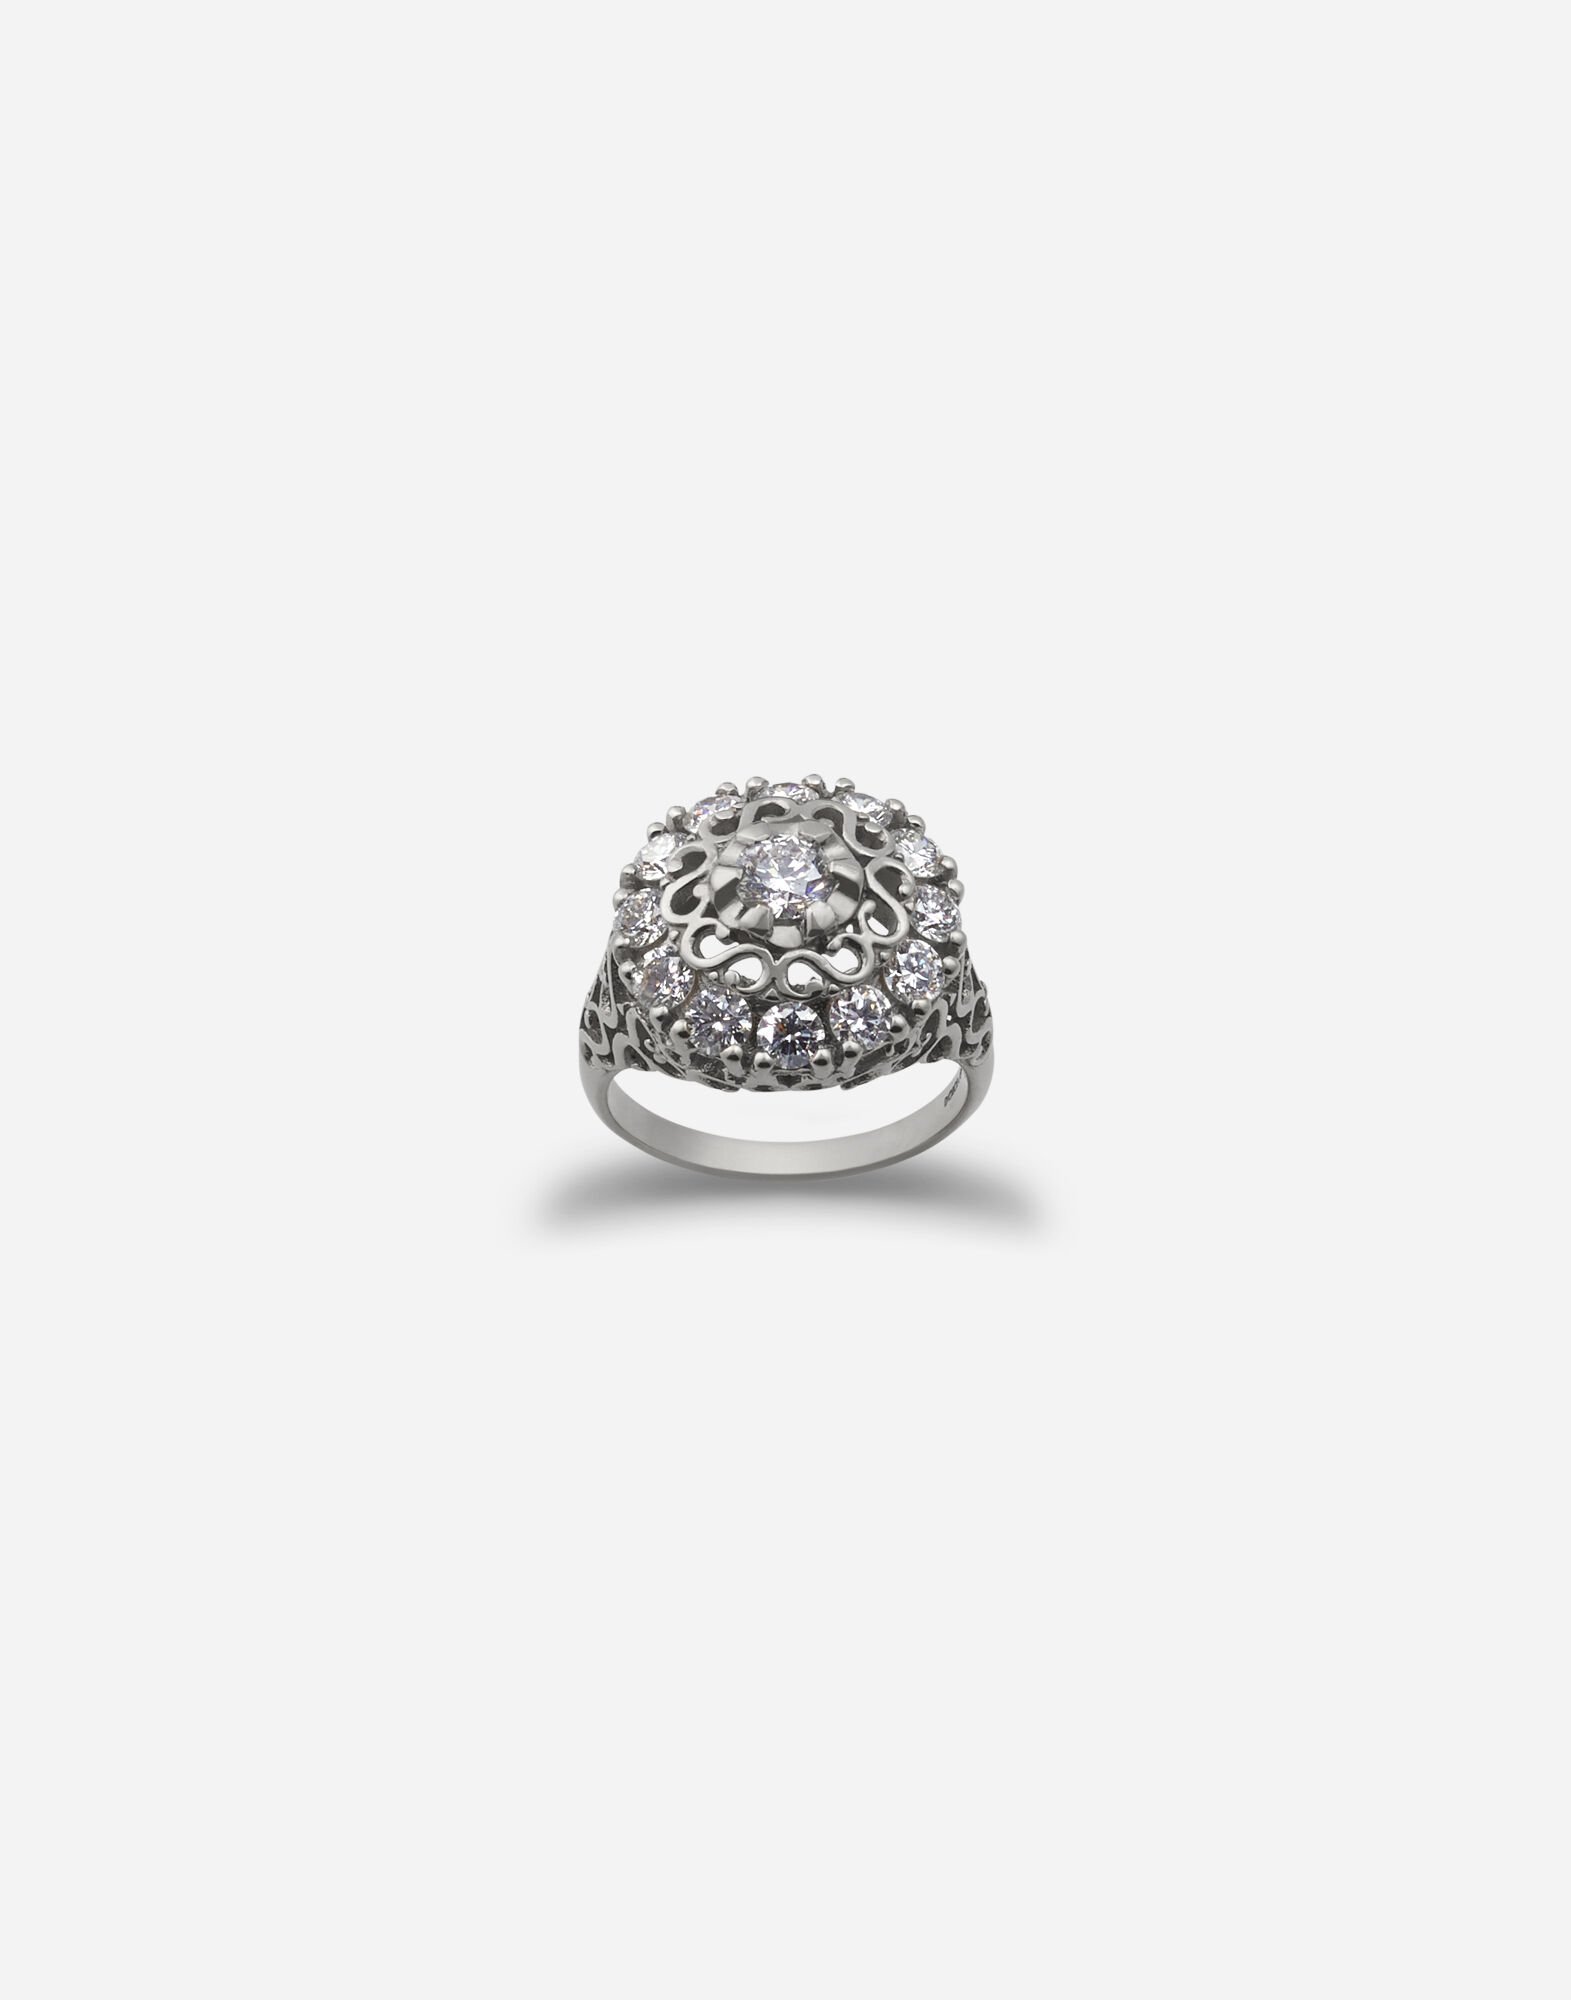 Dolce & Gabbana Sicily ring in white gold with diamonds Gold WRMR1GWMIXU